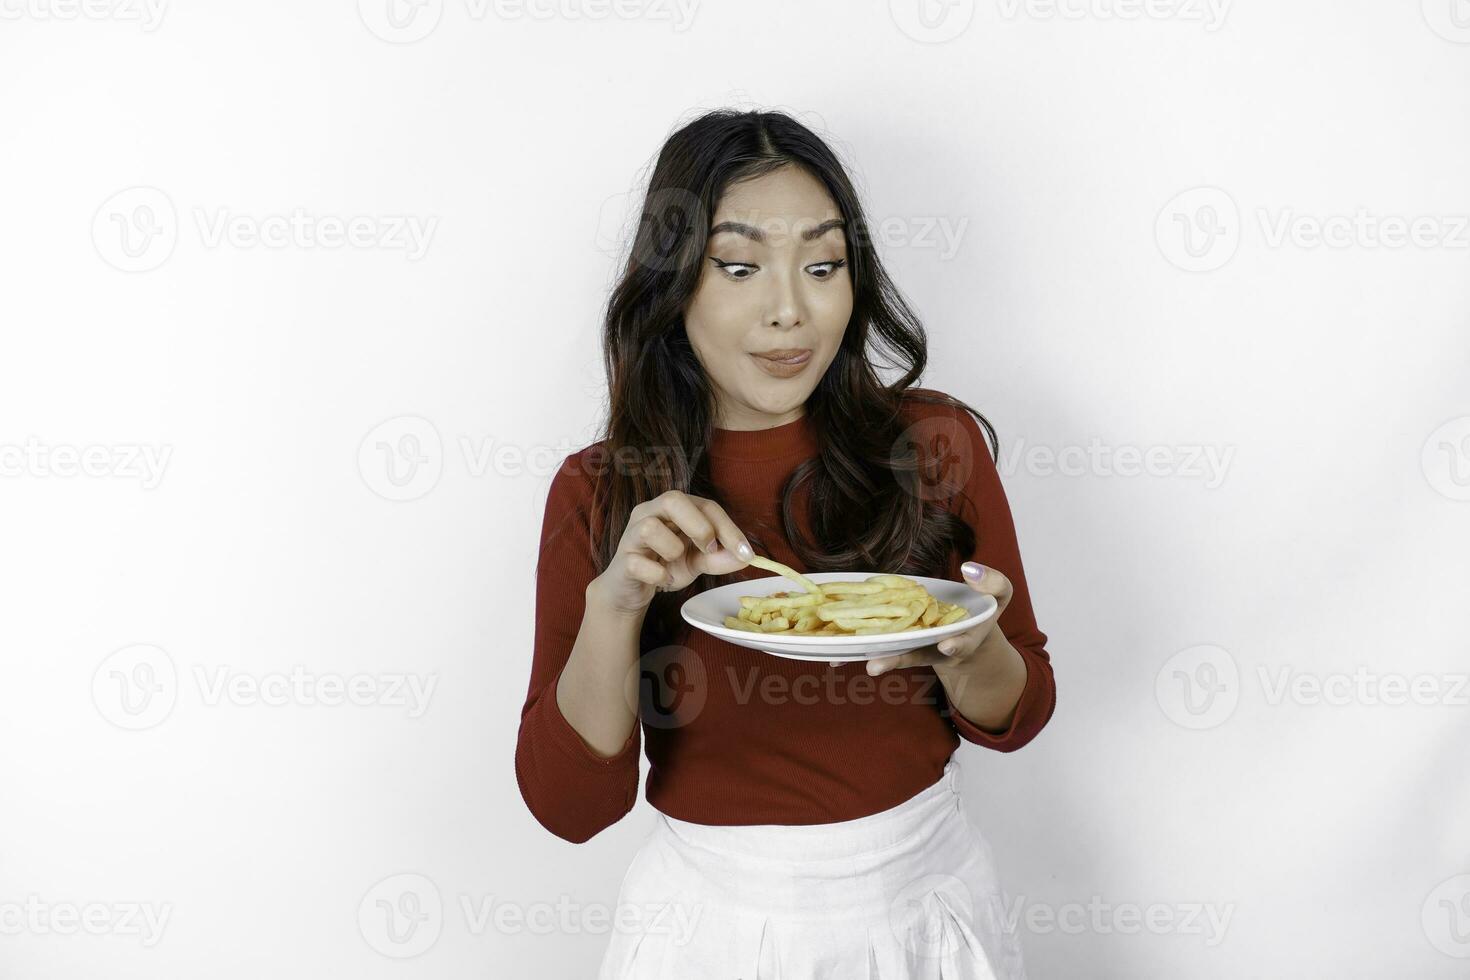 Young hungry woman wearing casual clothes hold a plate with fast food french fries potato isolated on white background studio portrait. People lifestyle food concept photo